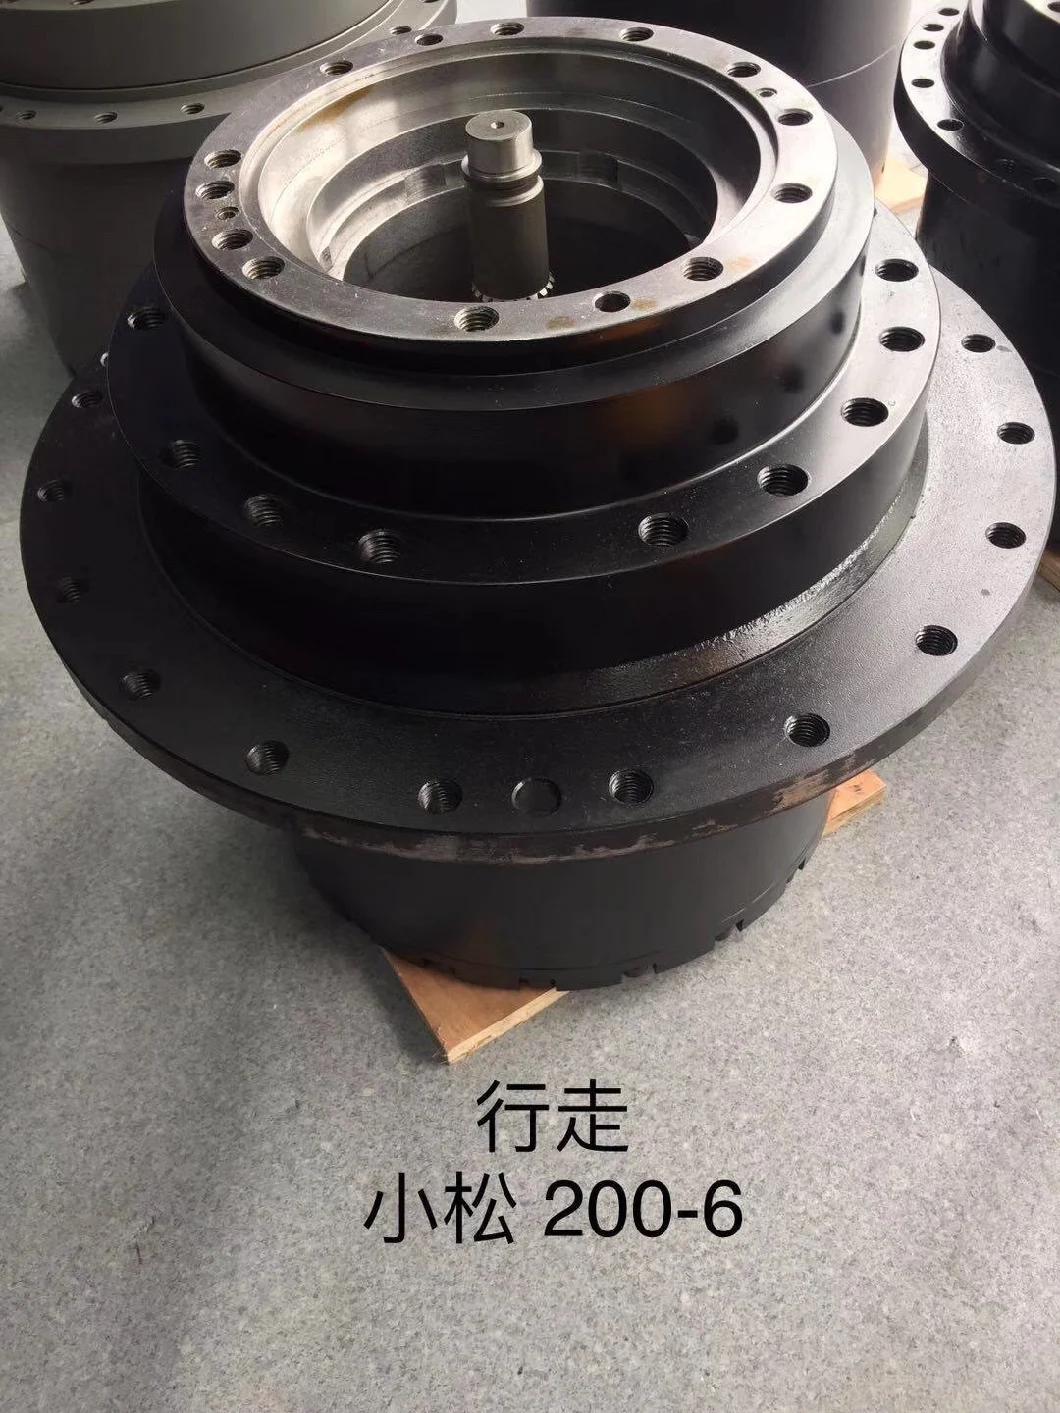  36 Tons Excavator Hydraulic Rotary Motor Assembly System for Sdlg